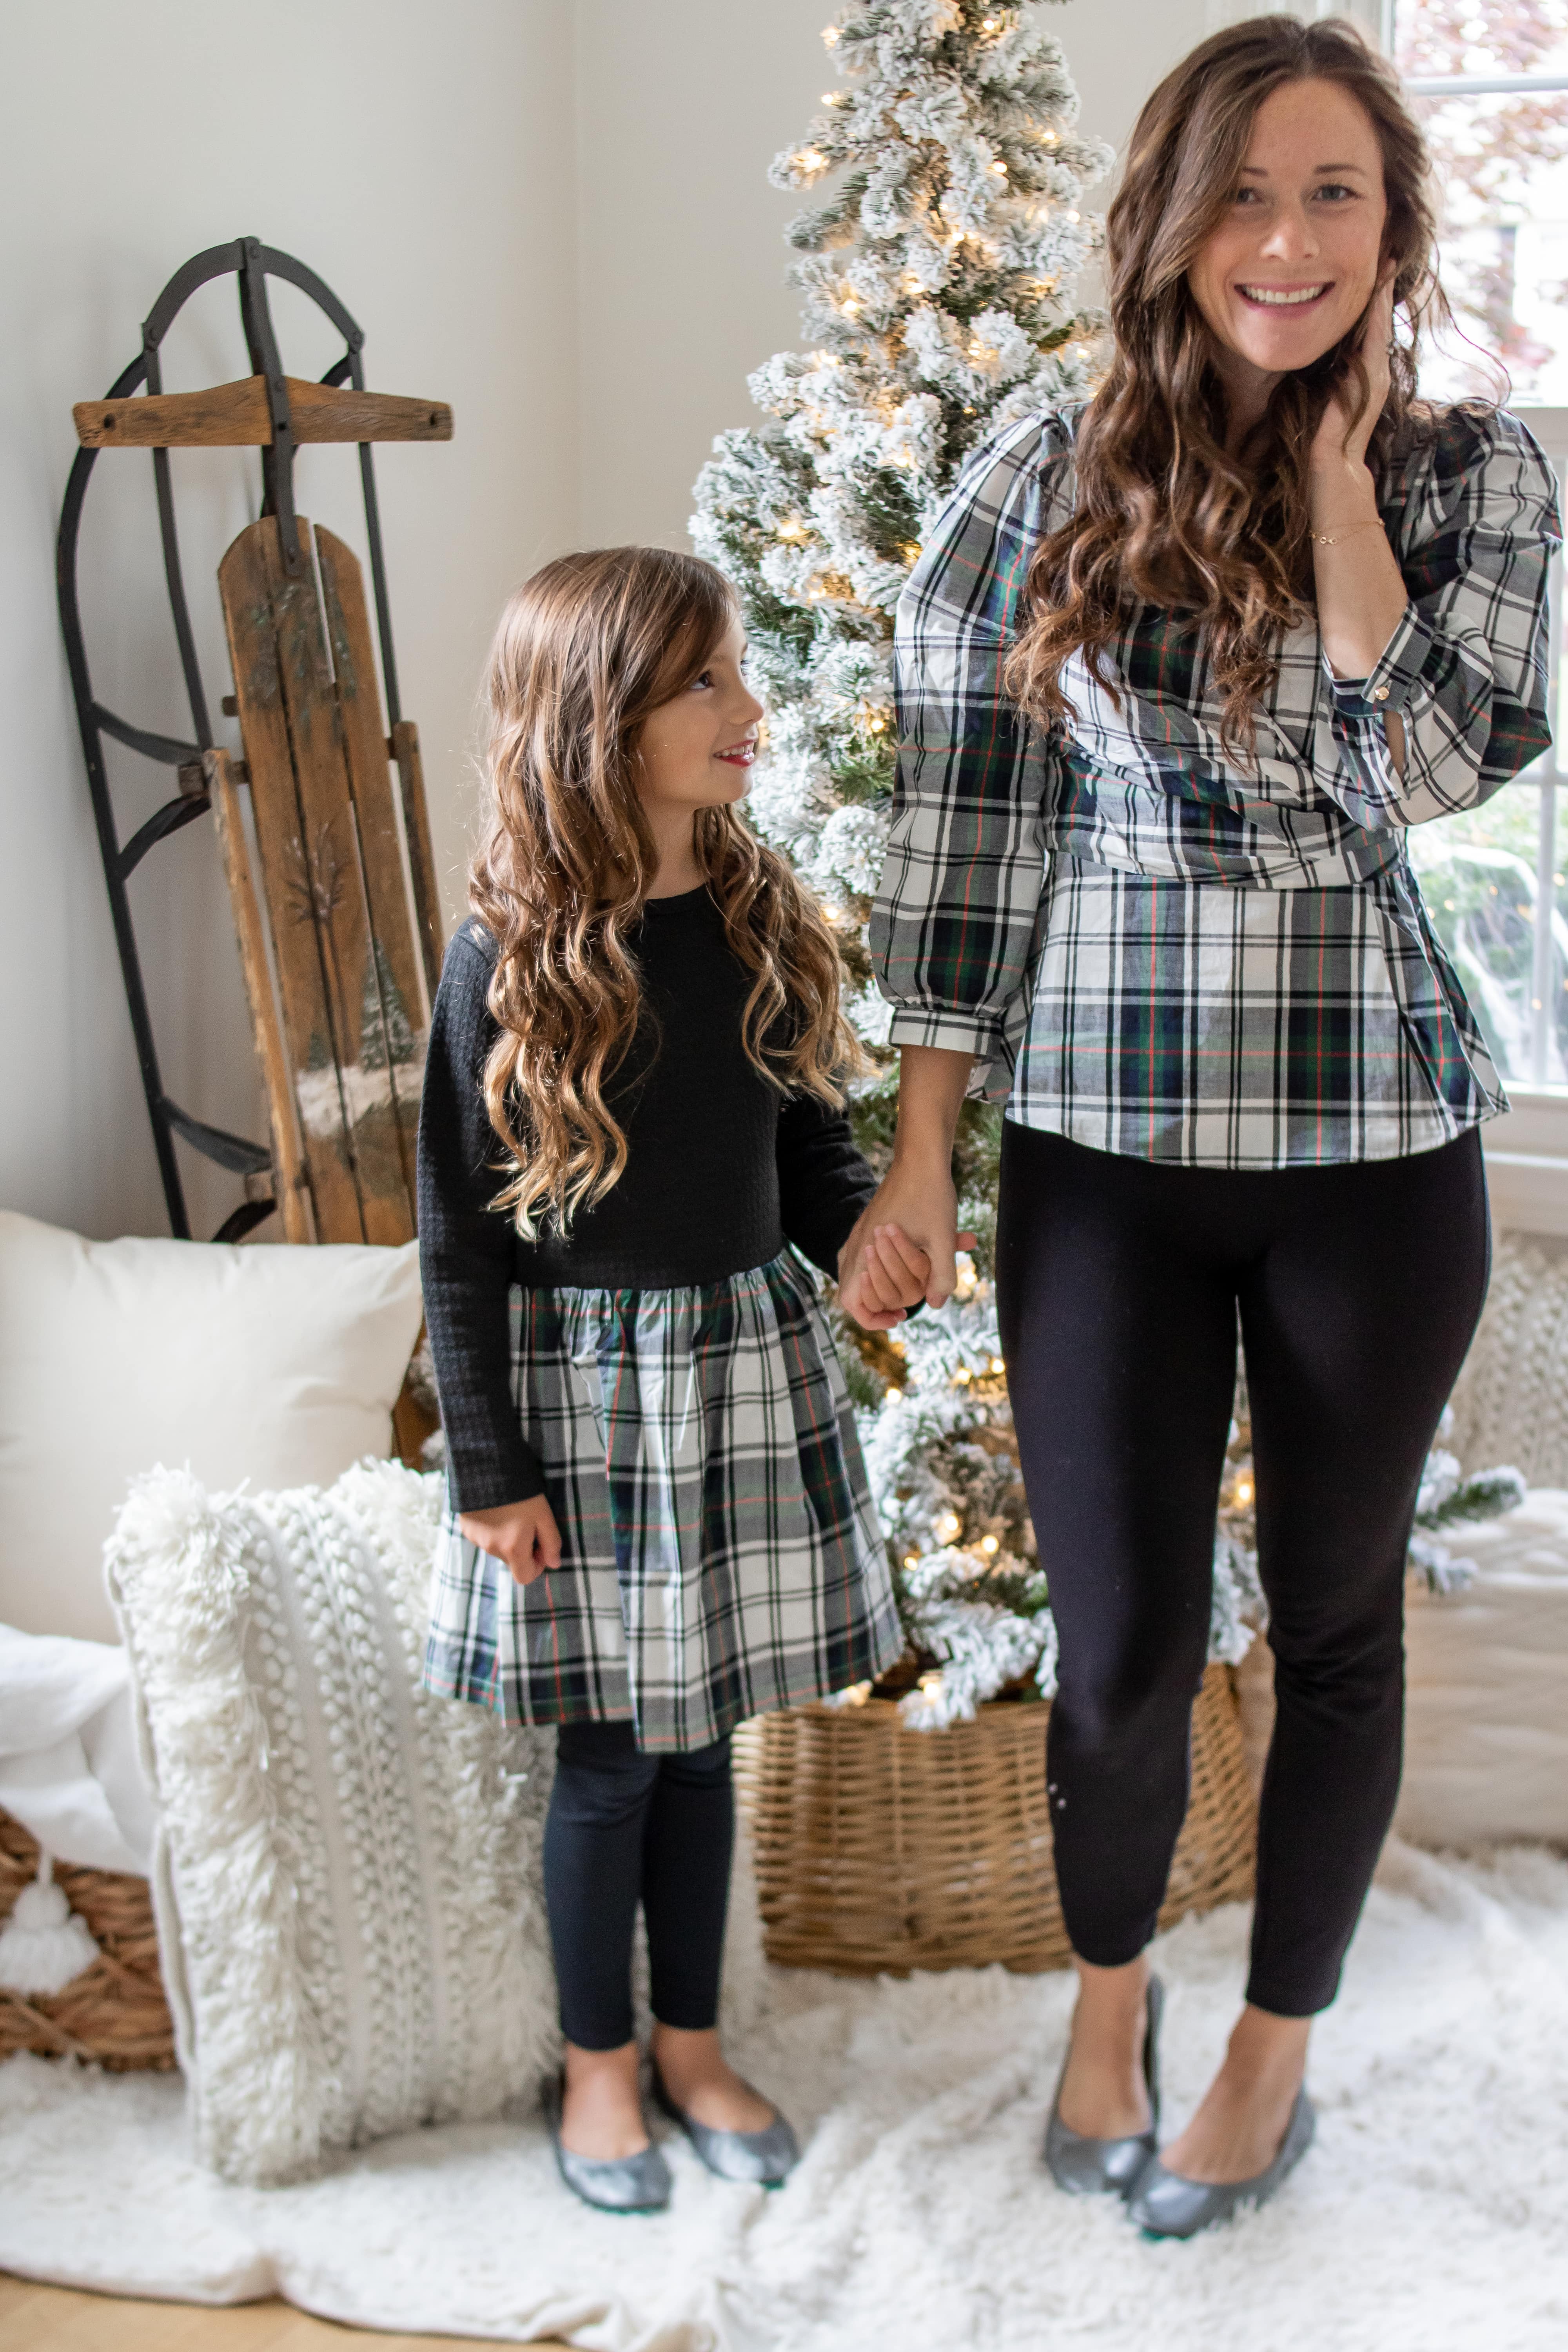 little girl with at mom wearing matching black plaid outfits and Tieks